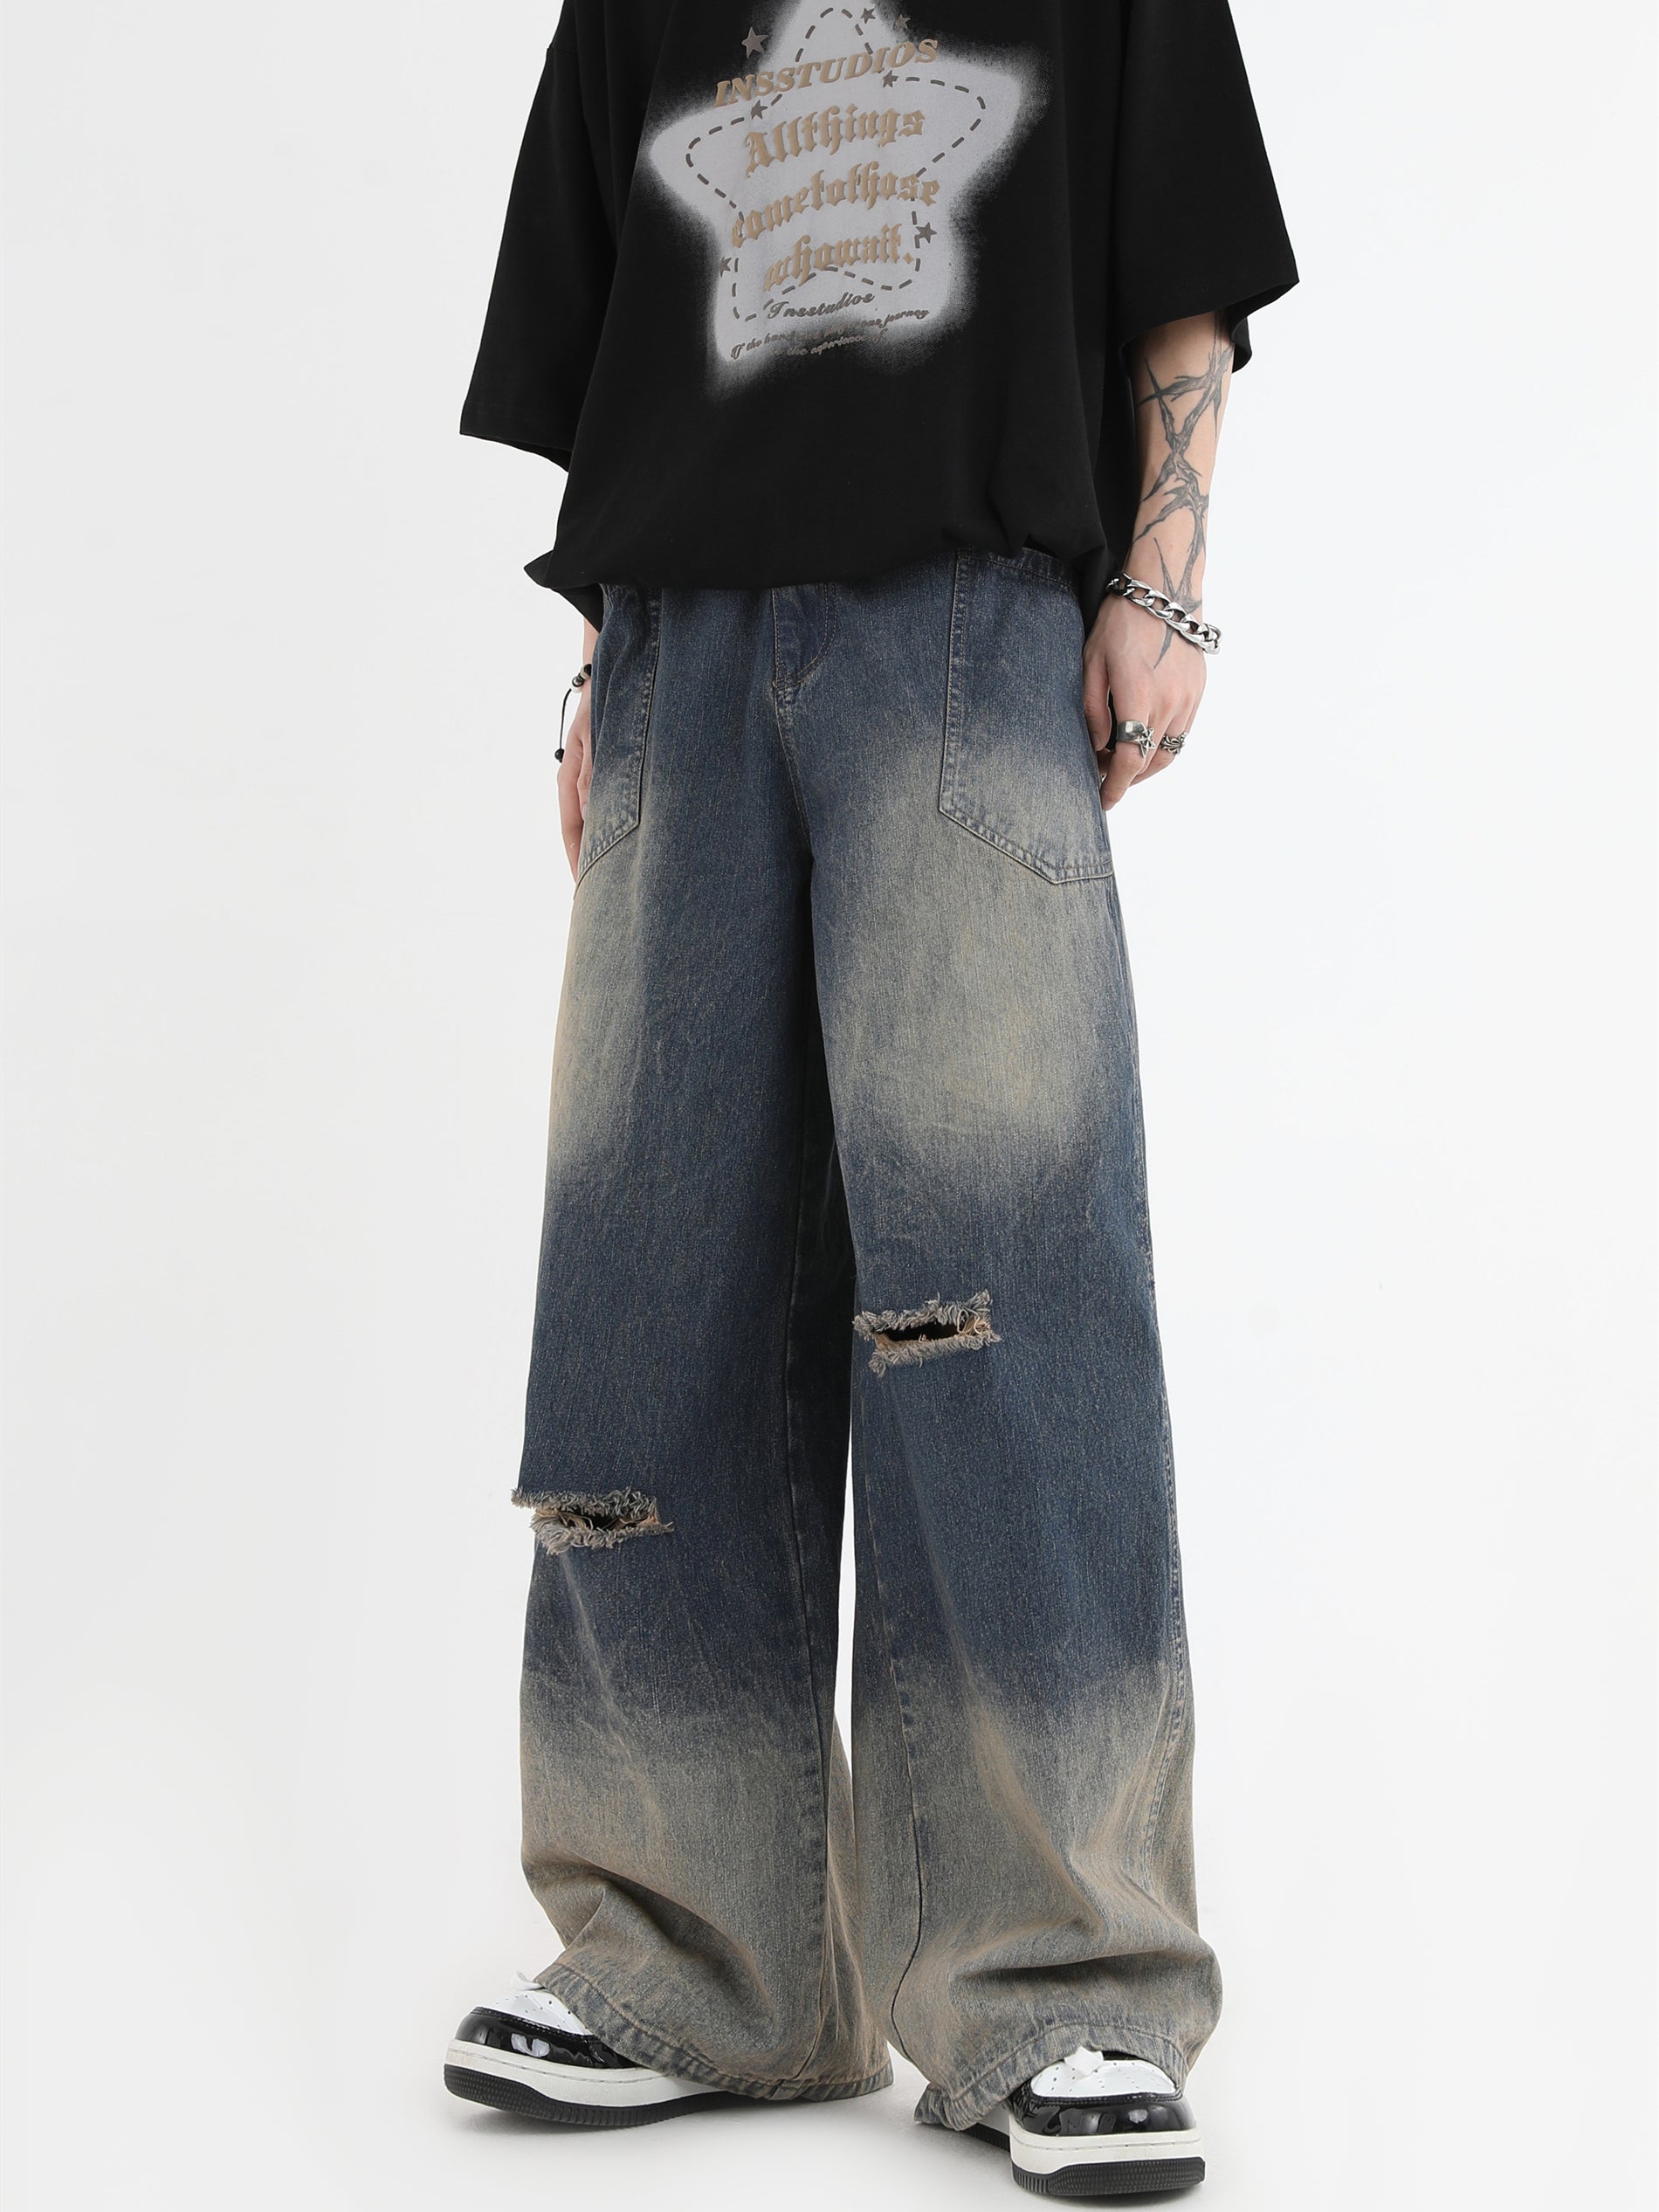 Vintage American Cut Washed Jeans - chiclara